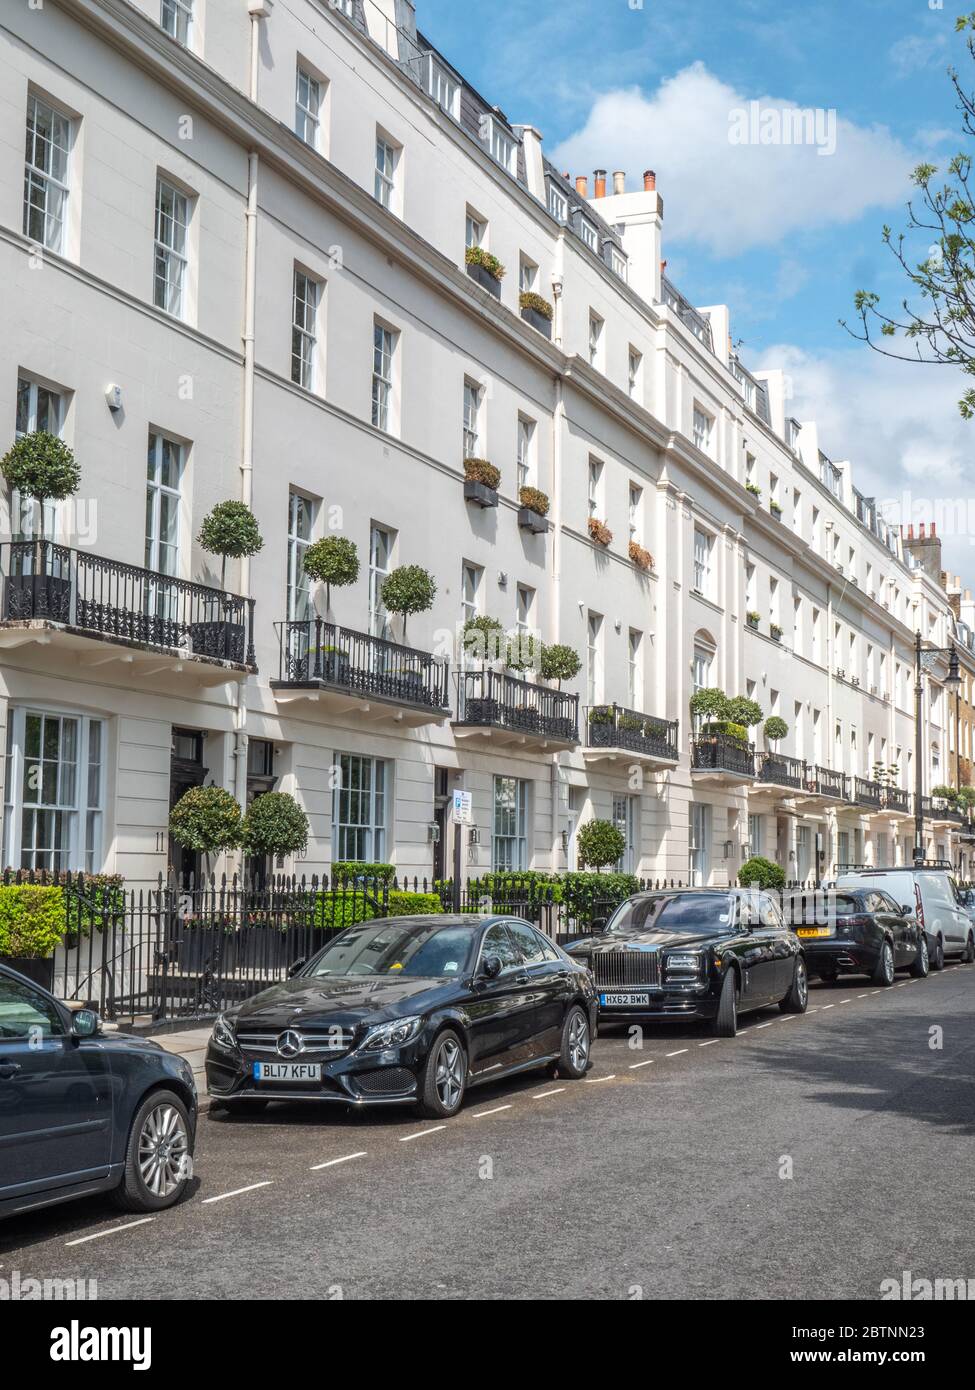 Belgravia, London, England. A street scene of Georgian architecture and luxury cars typical to the exclusive district in West London. Stock Photo